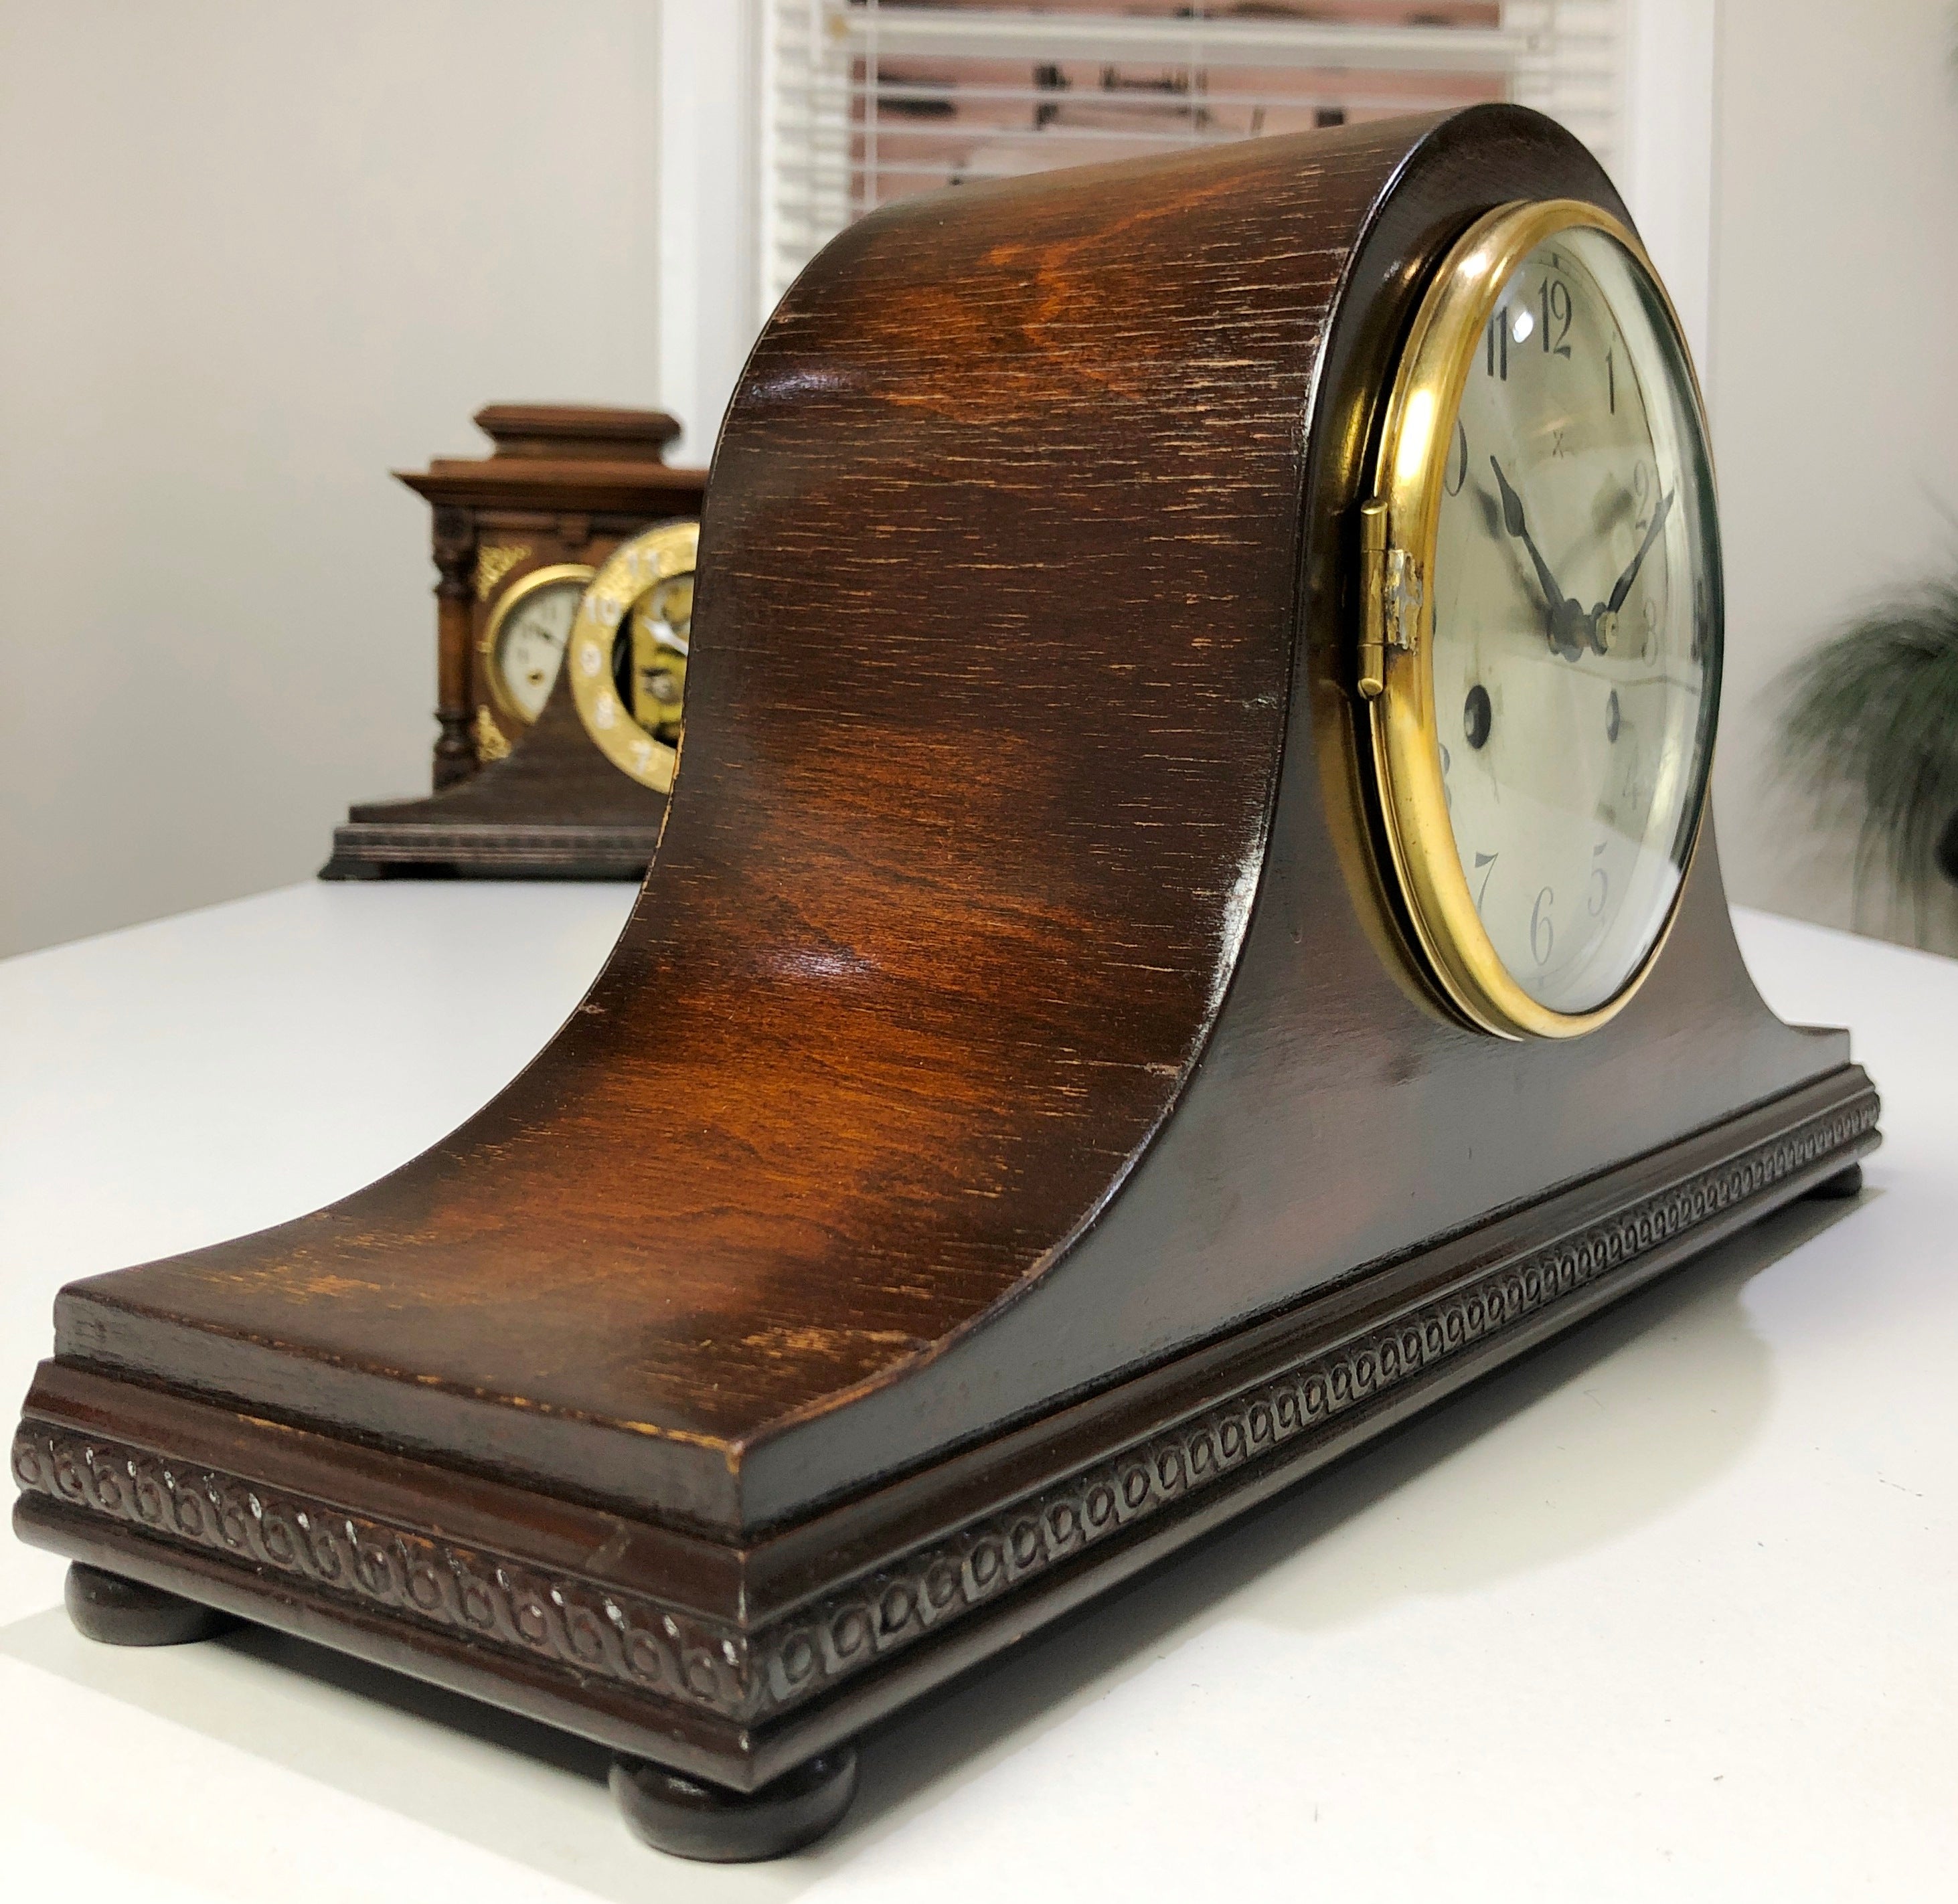 Vintage HAC Hammer on Coil Chime Mantel Clock | eXibit collection